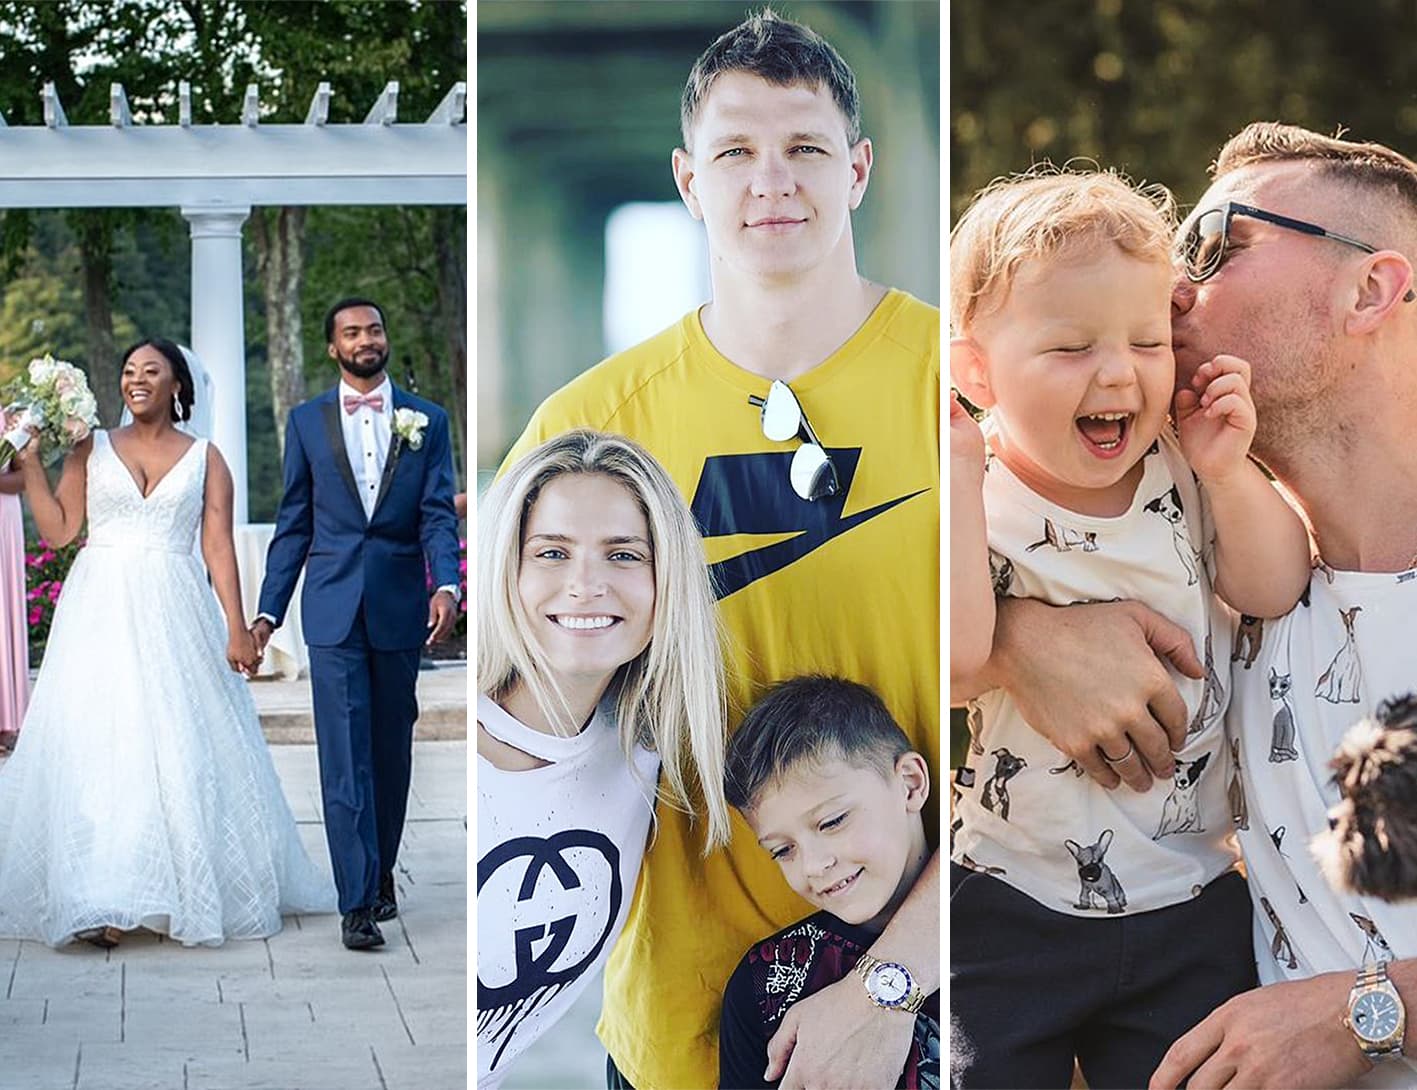 How VTB United League players spent the last week of summer 2019